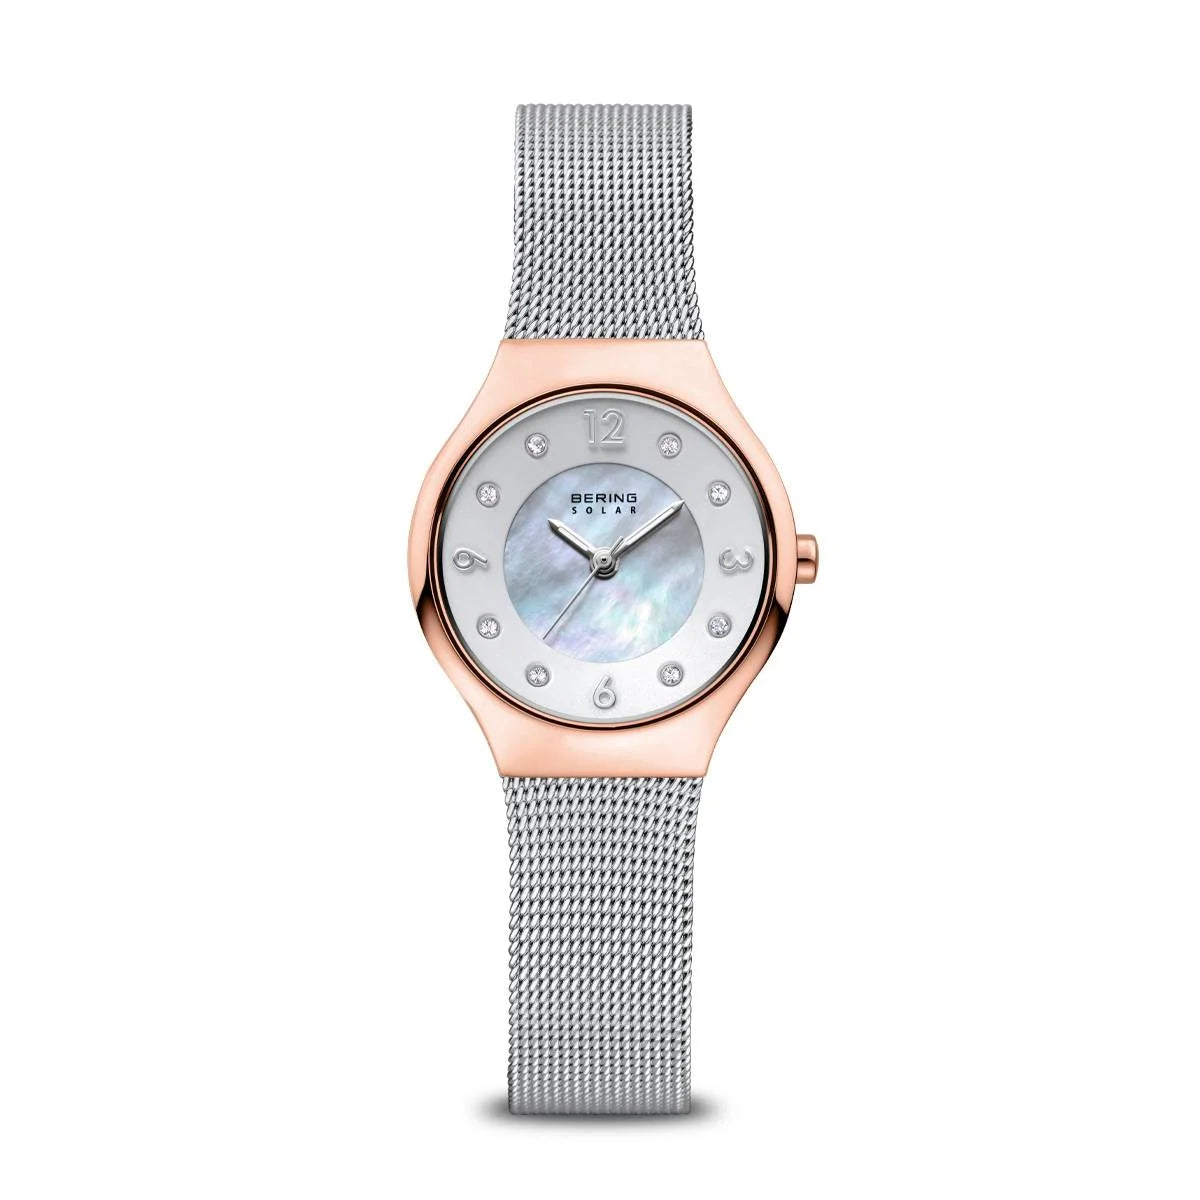 Bering Solar Powered Ladies Watch with Rose Gold